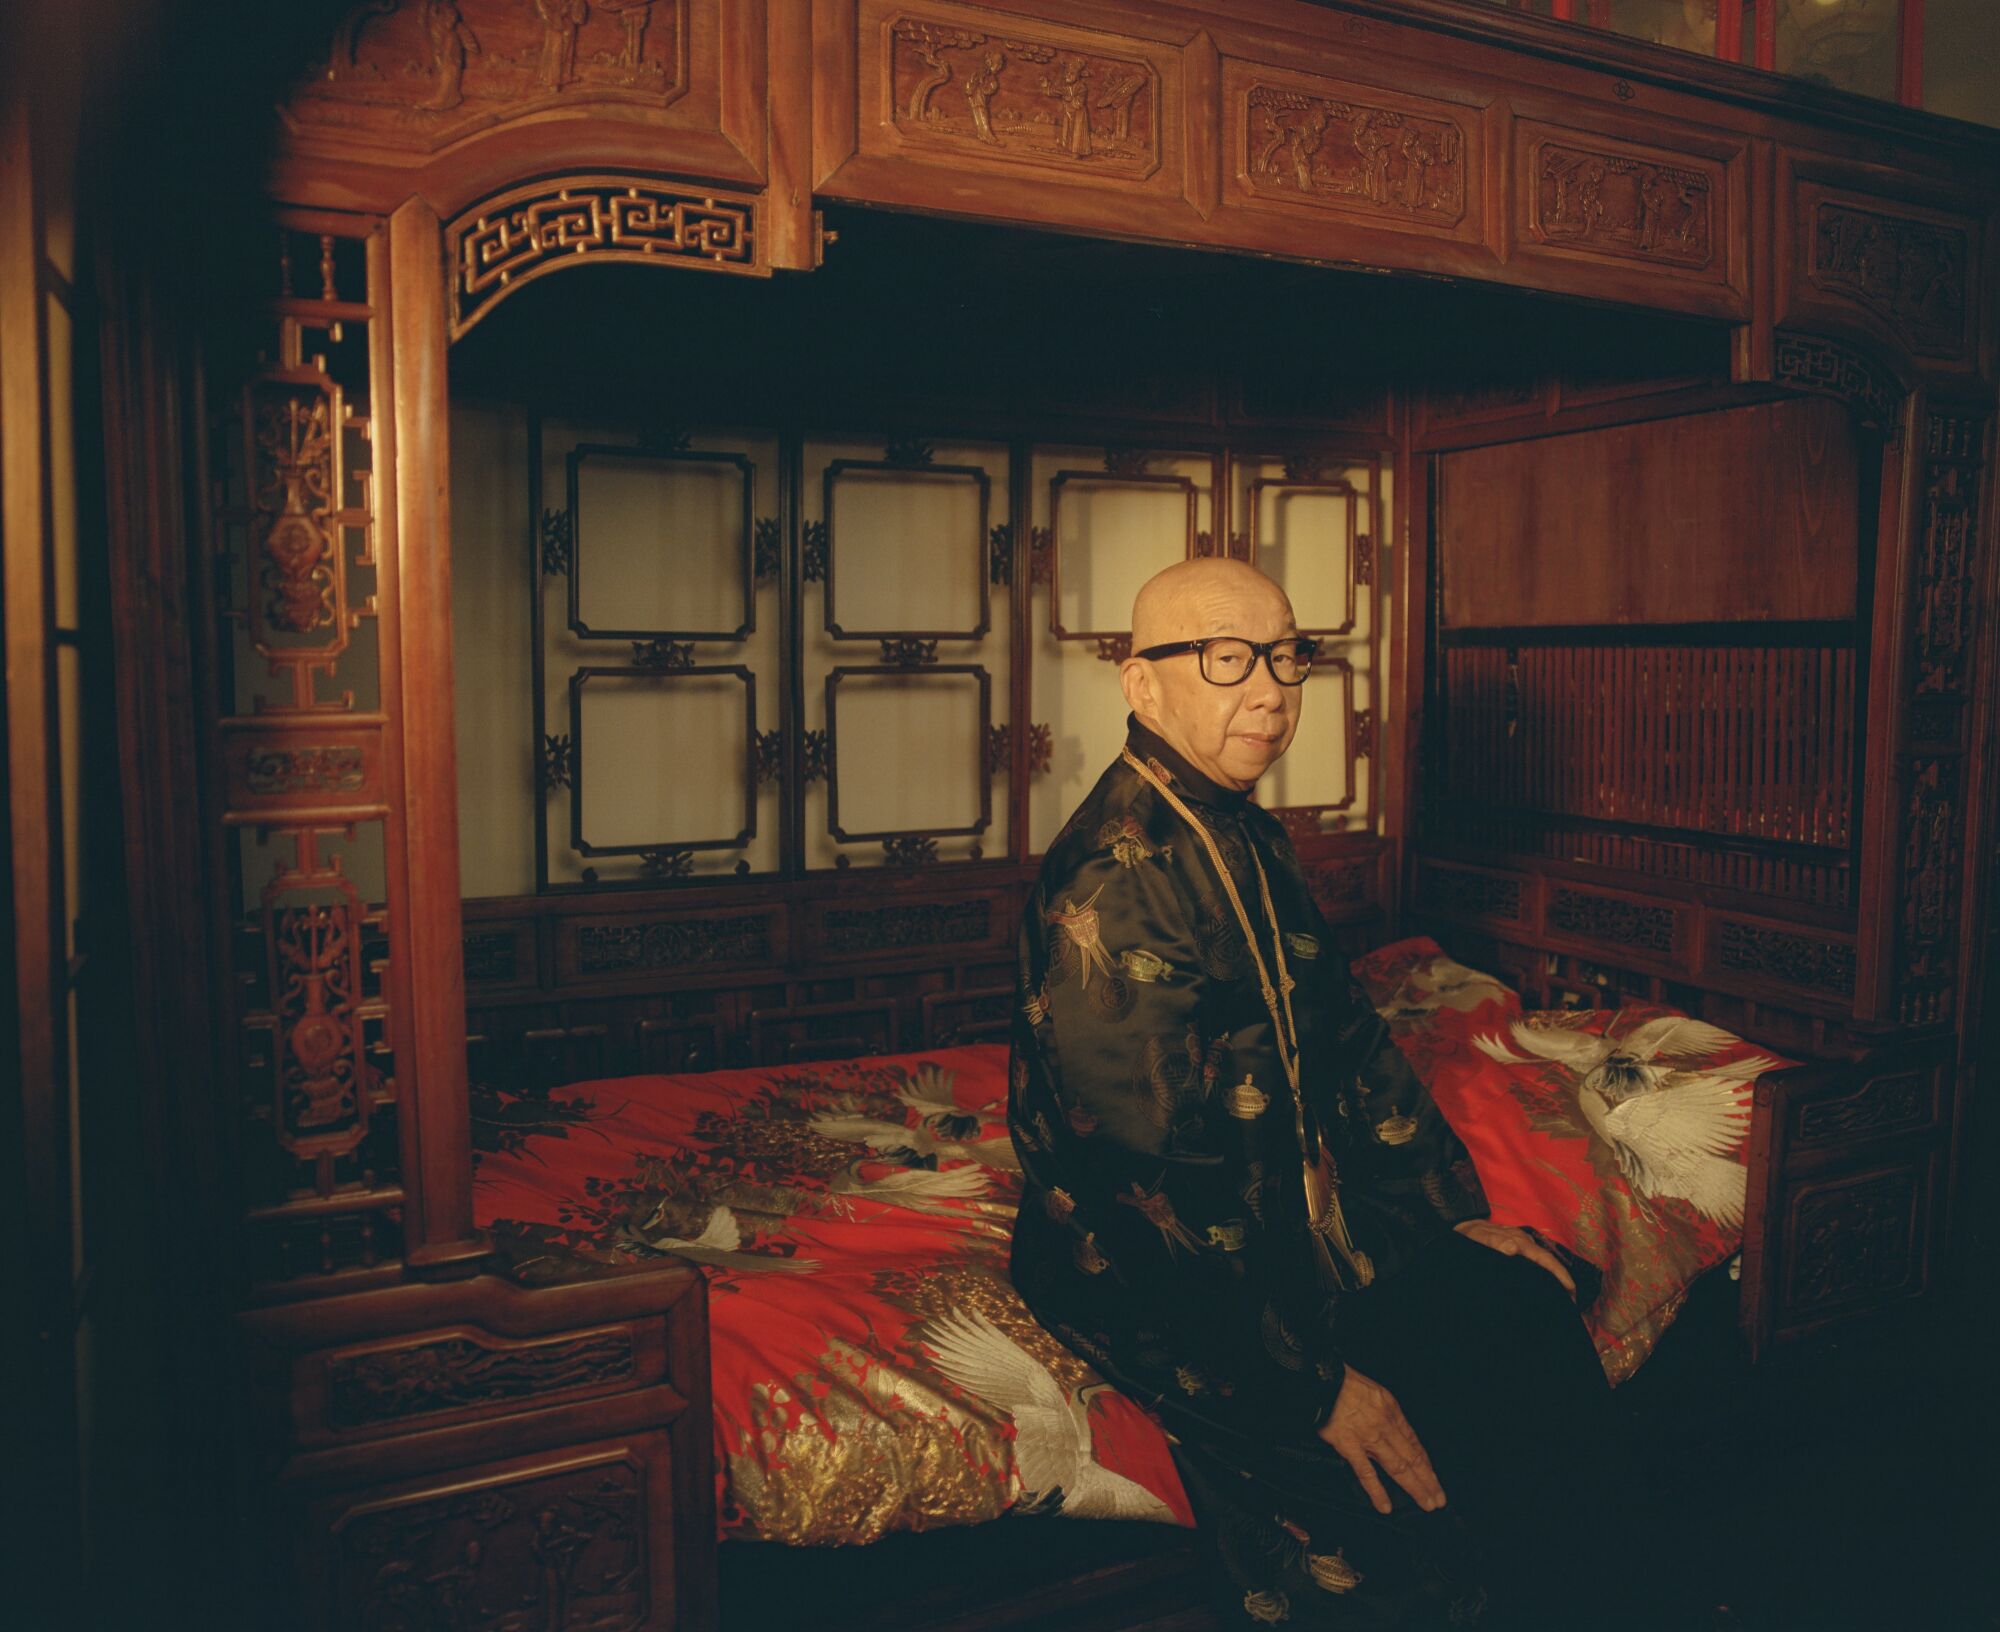 Lai sleeps in a hardwood opium bed that dates back hundreds of years, under a duvet he sewed out of a wedding kimono.